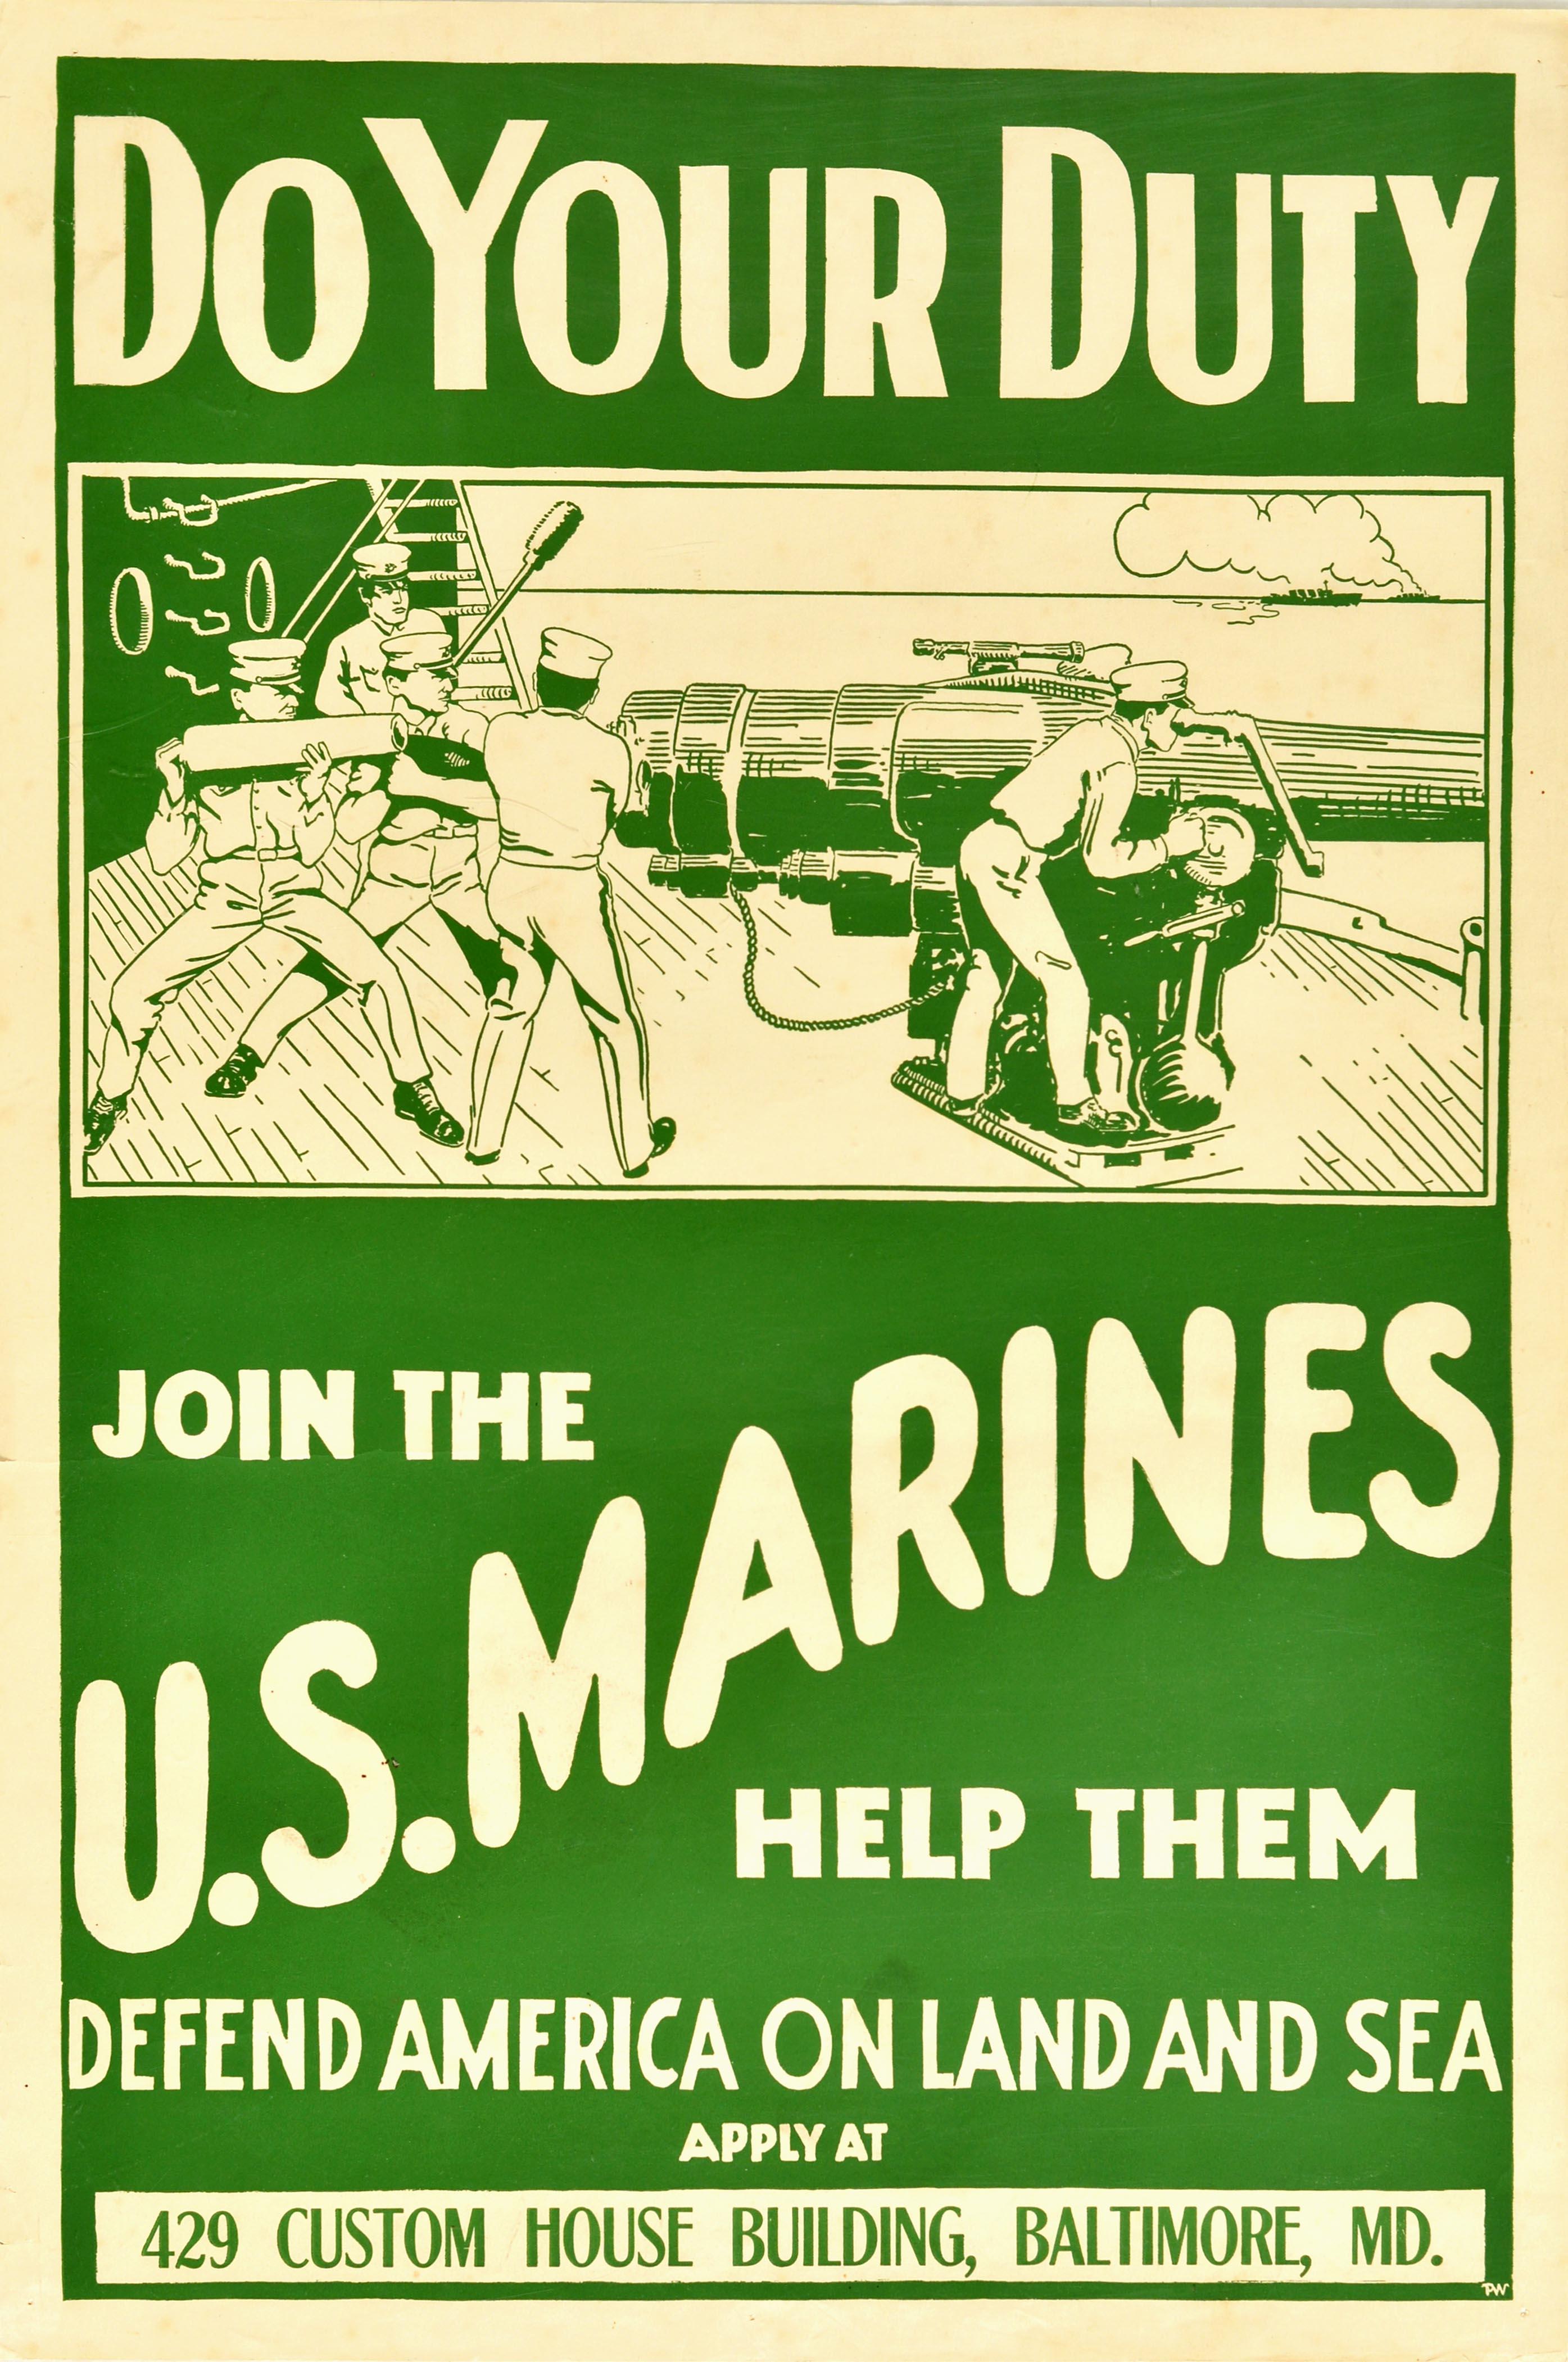 P.W. Print - Original Antique Poster Join The US Marines WWI Military Recruitment War Ship